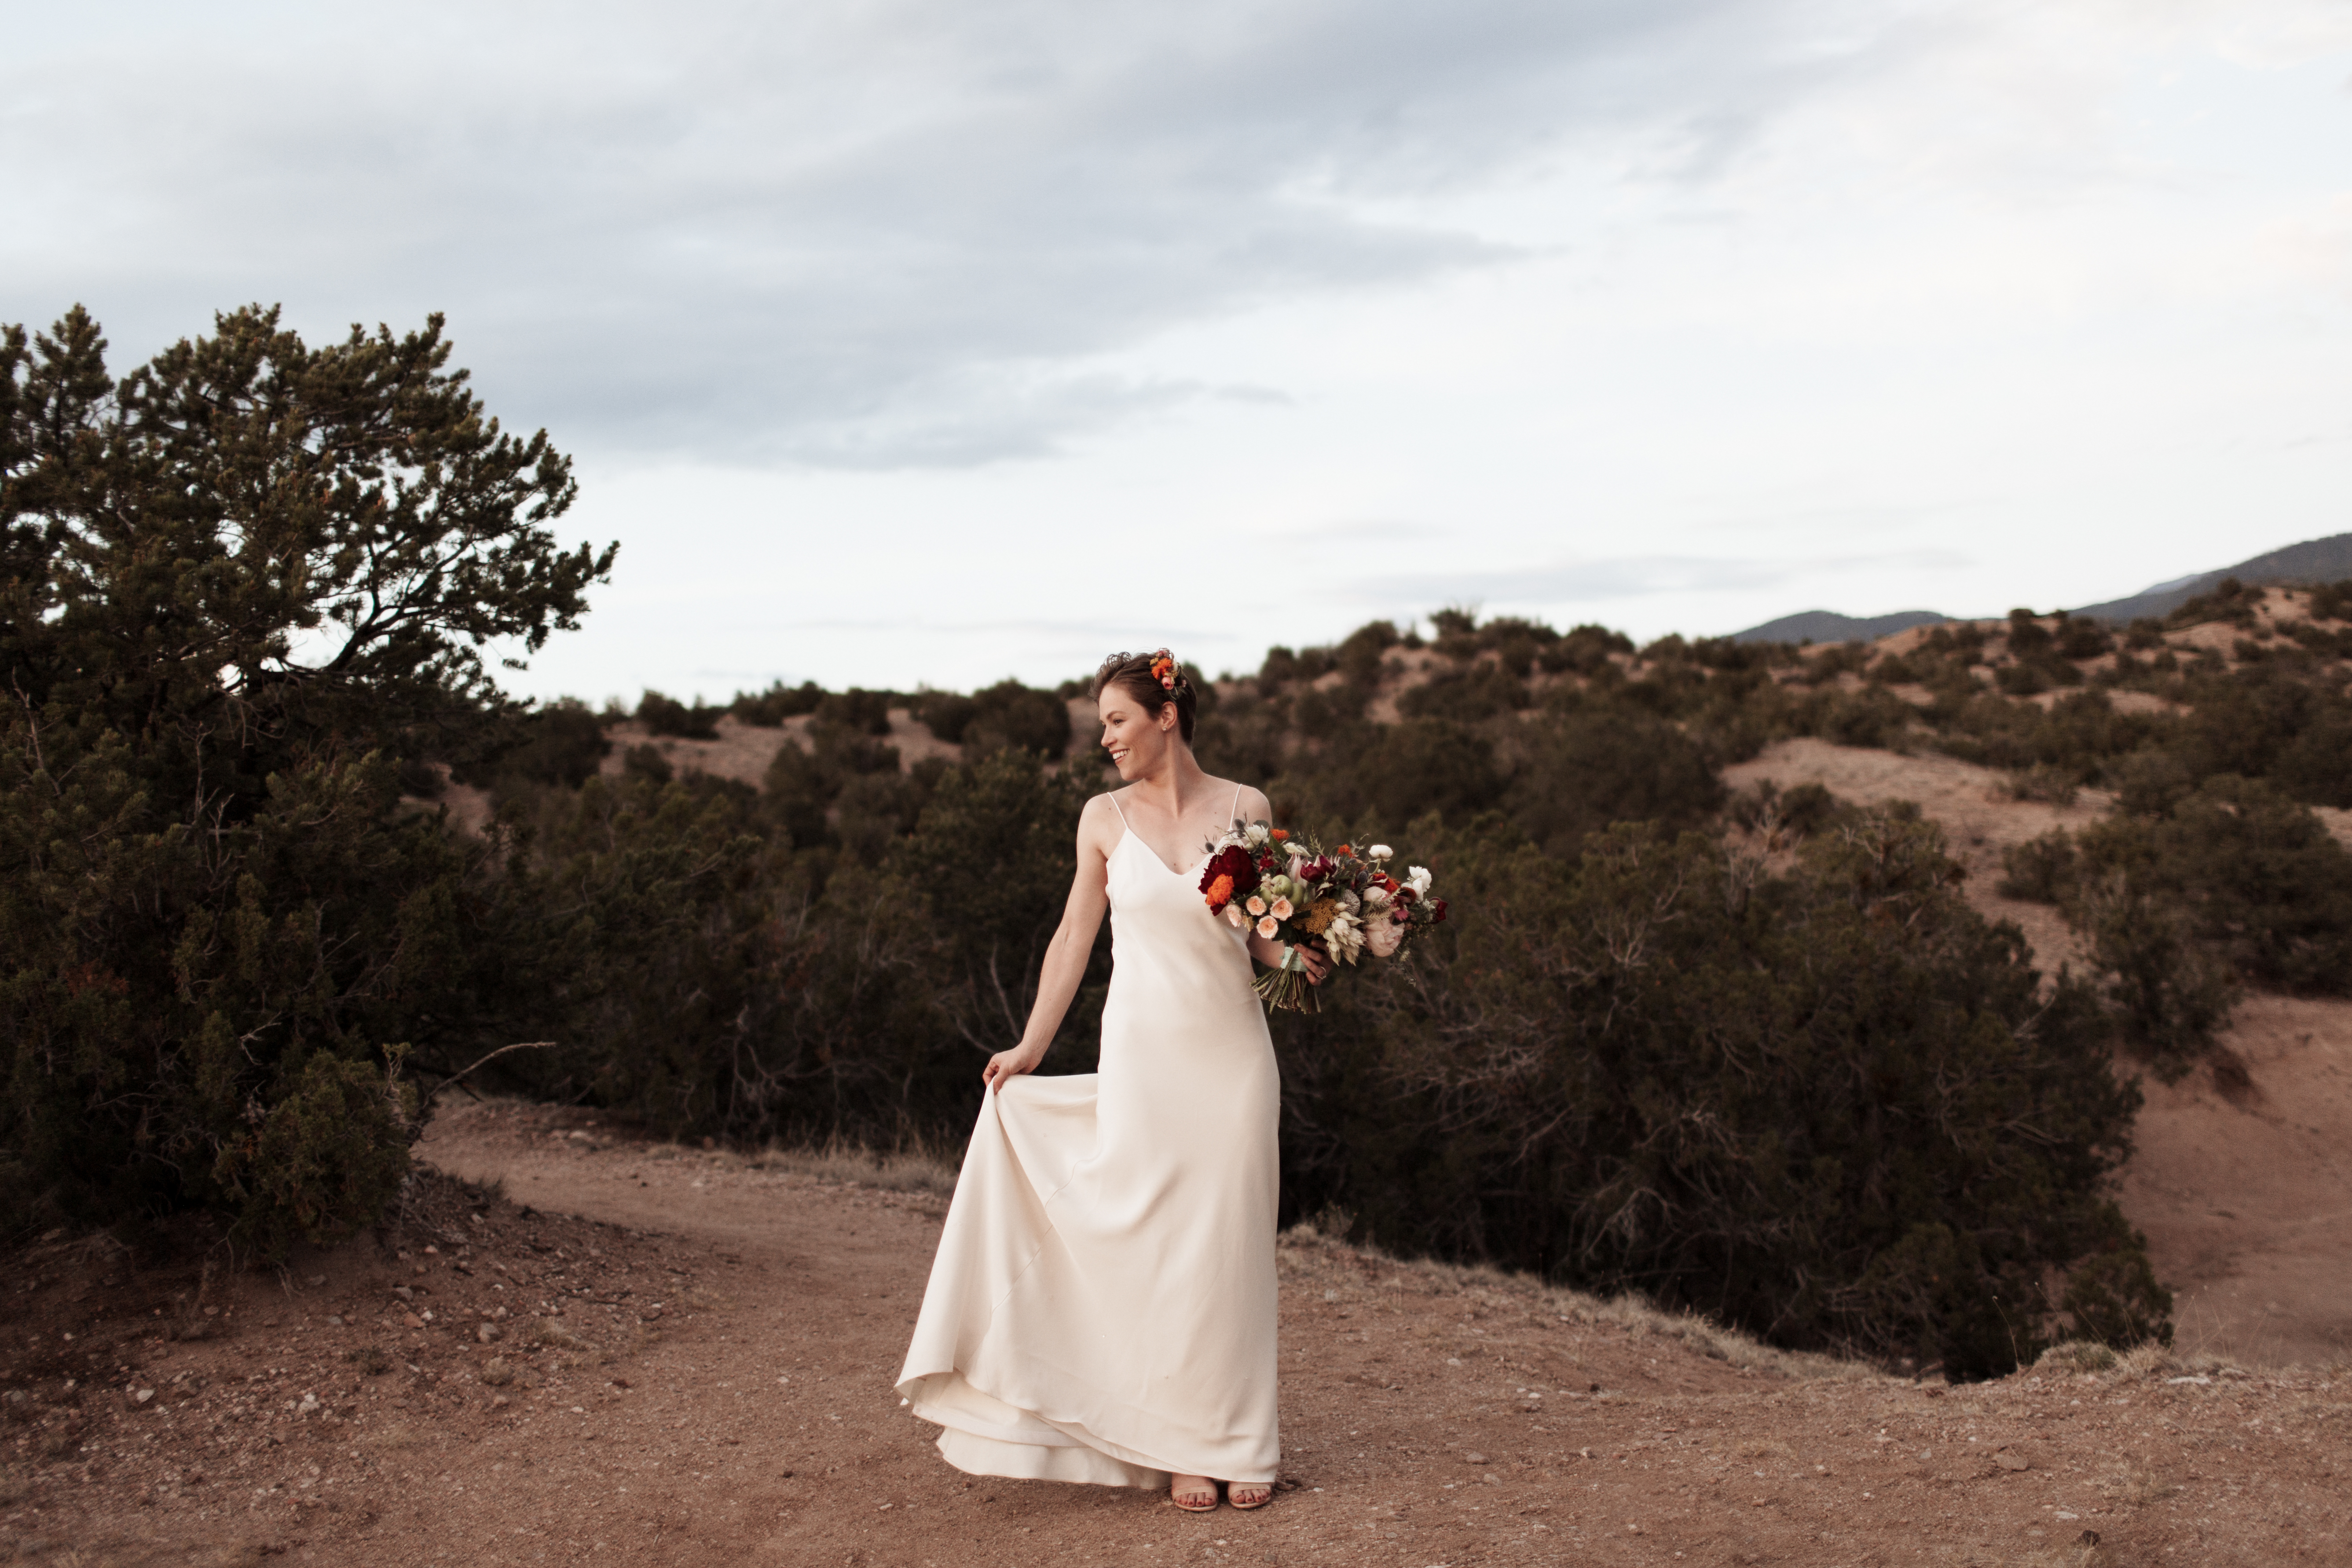 outdoor photography wedding desert landscape planning bouquet jewel tones simple gown bridal updo hair piece silk nature New Mexico photography